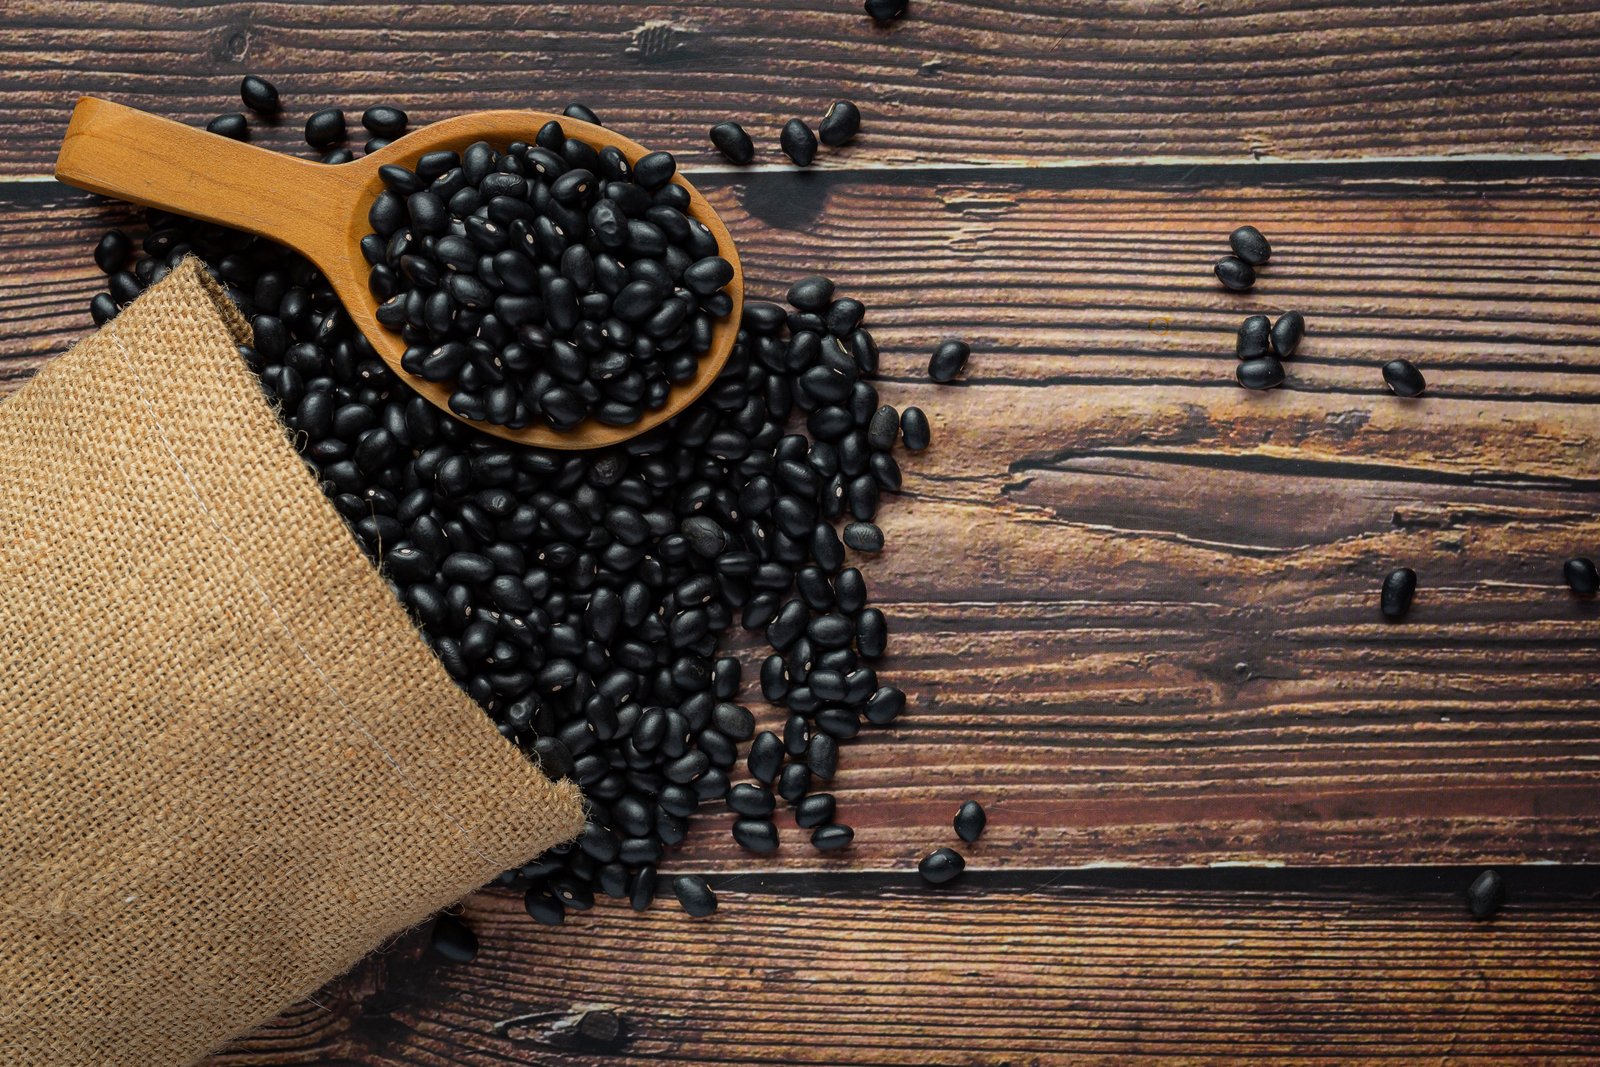 Black Beans Benefits: Are They Good Your Health?